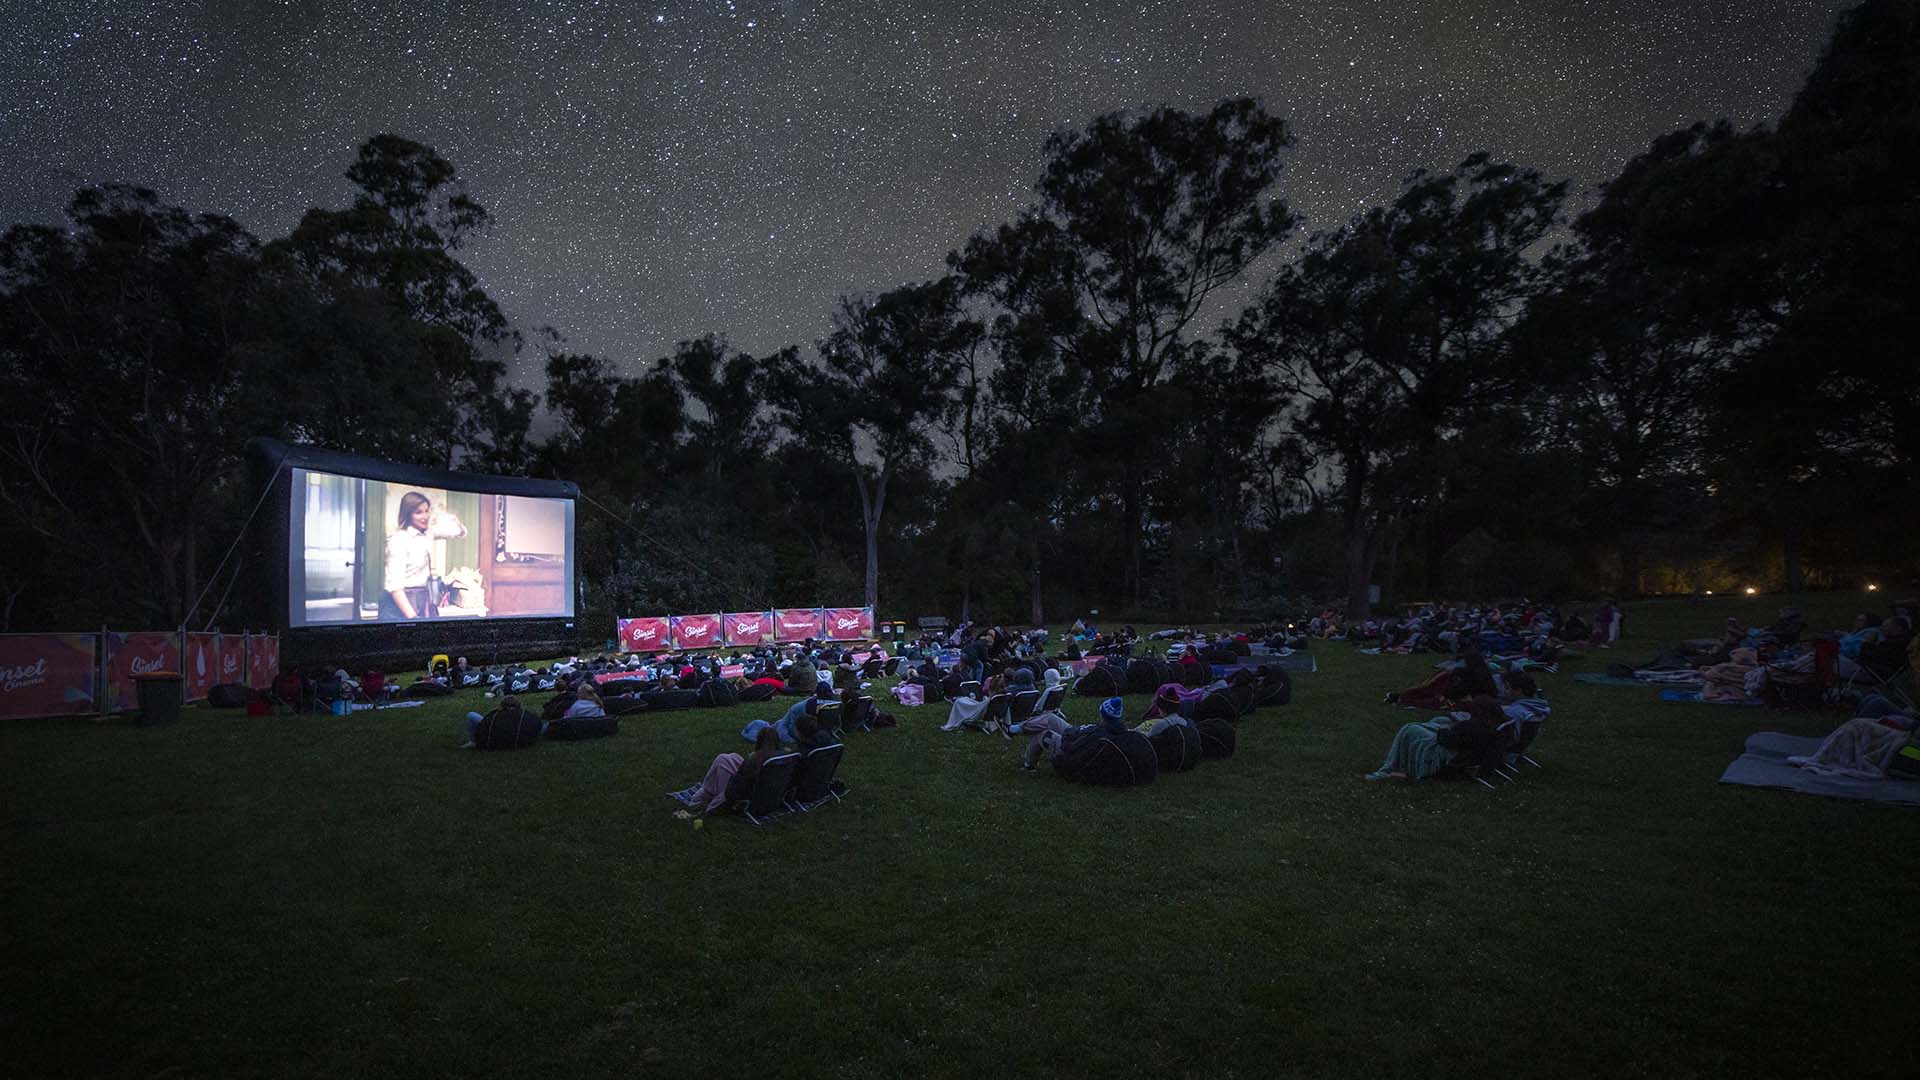 Sunset Cinema Is Touring the East Coast for Another Summer (and Autumn) of Movies Under the Stars